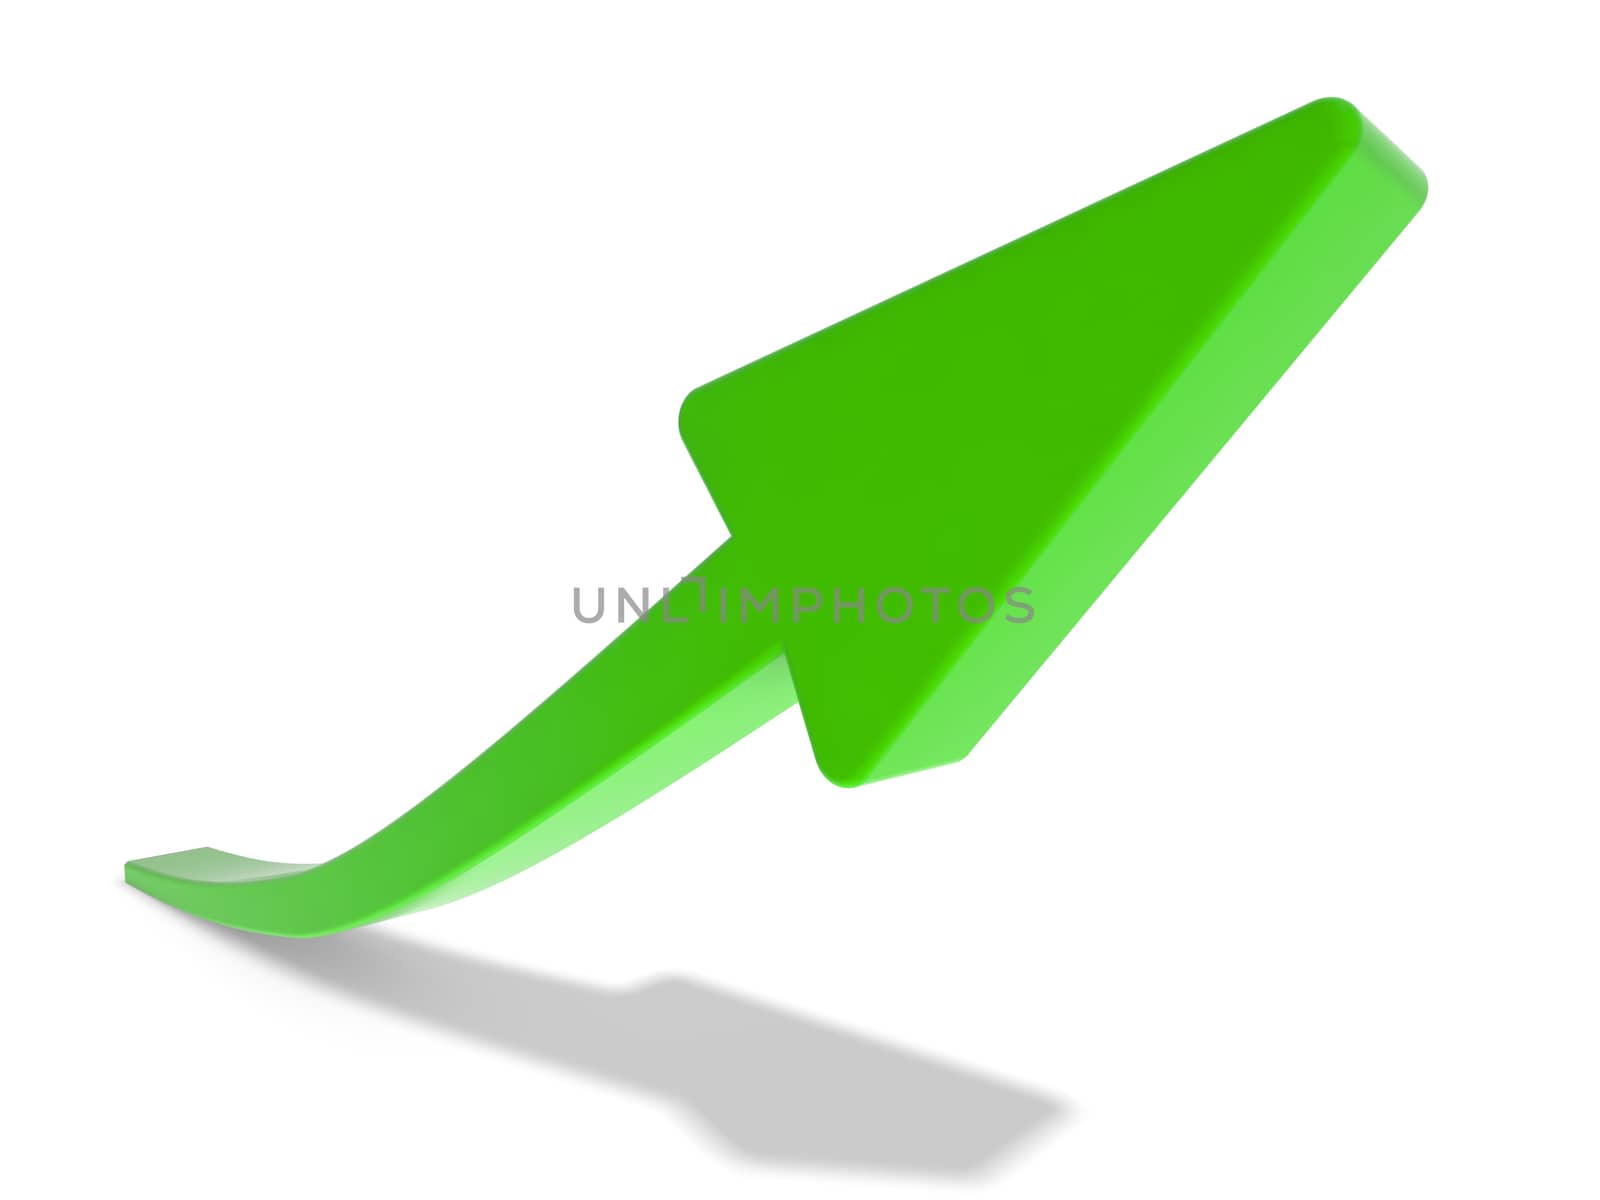 Green arrow sign curving in an upwards direction on a white background